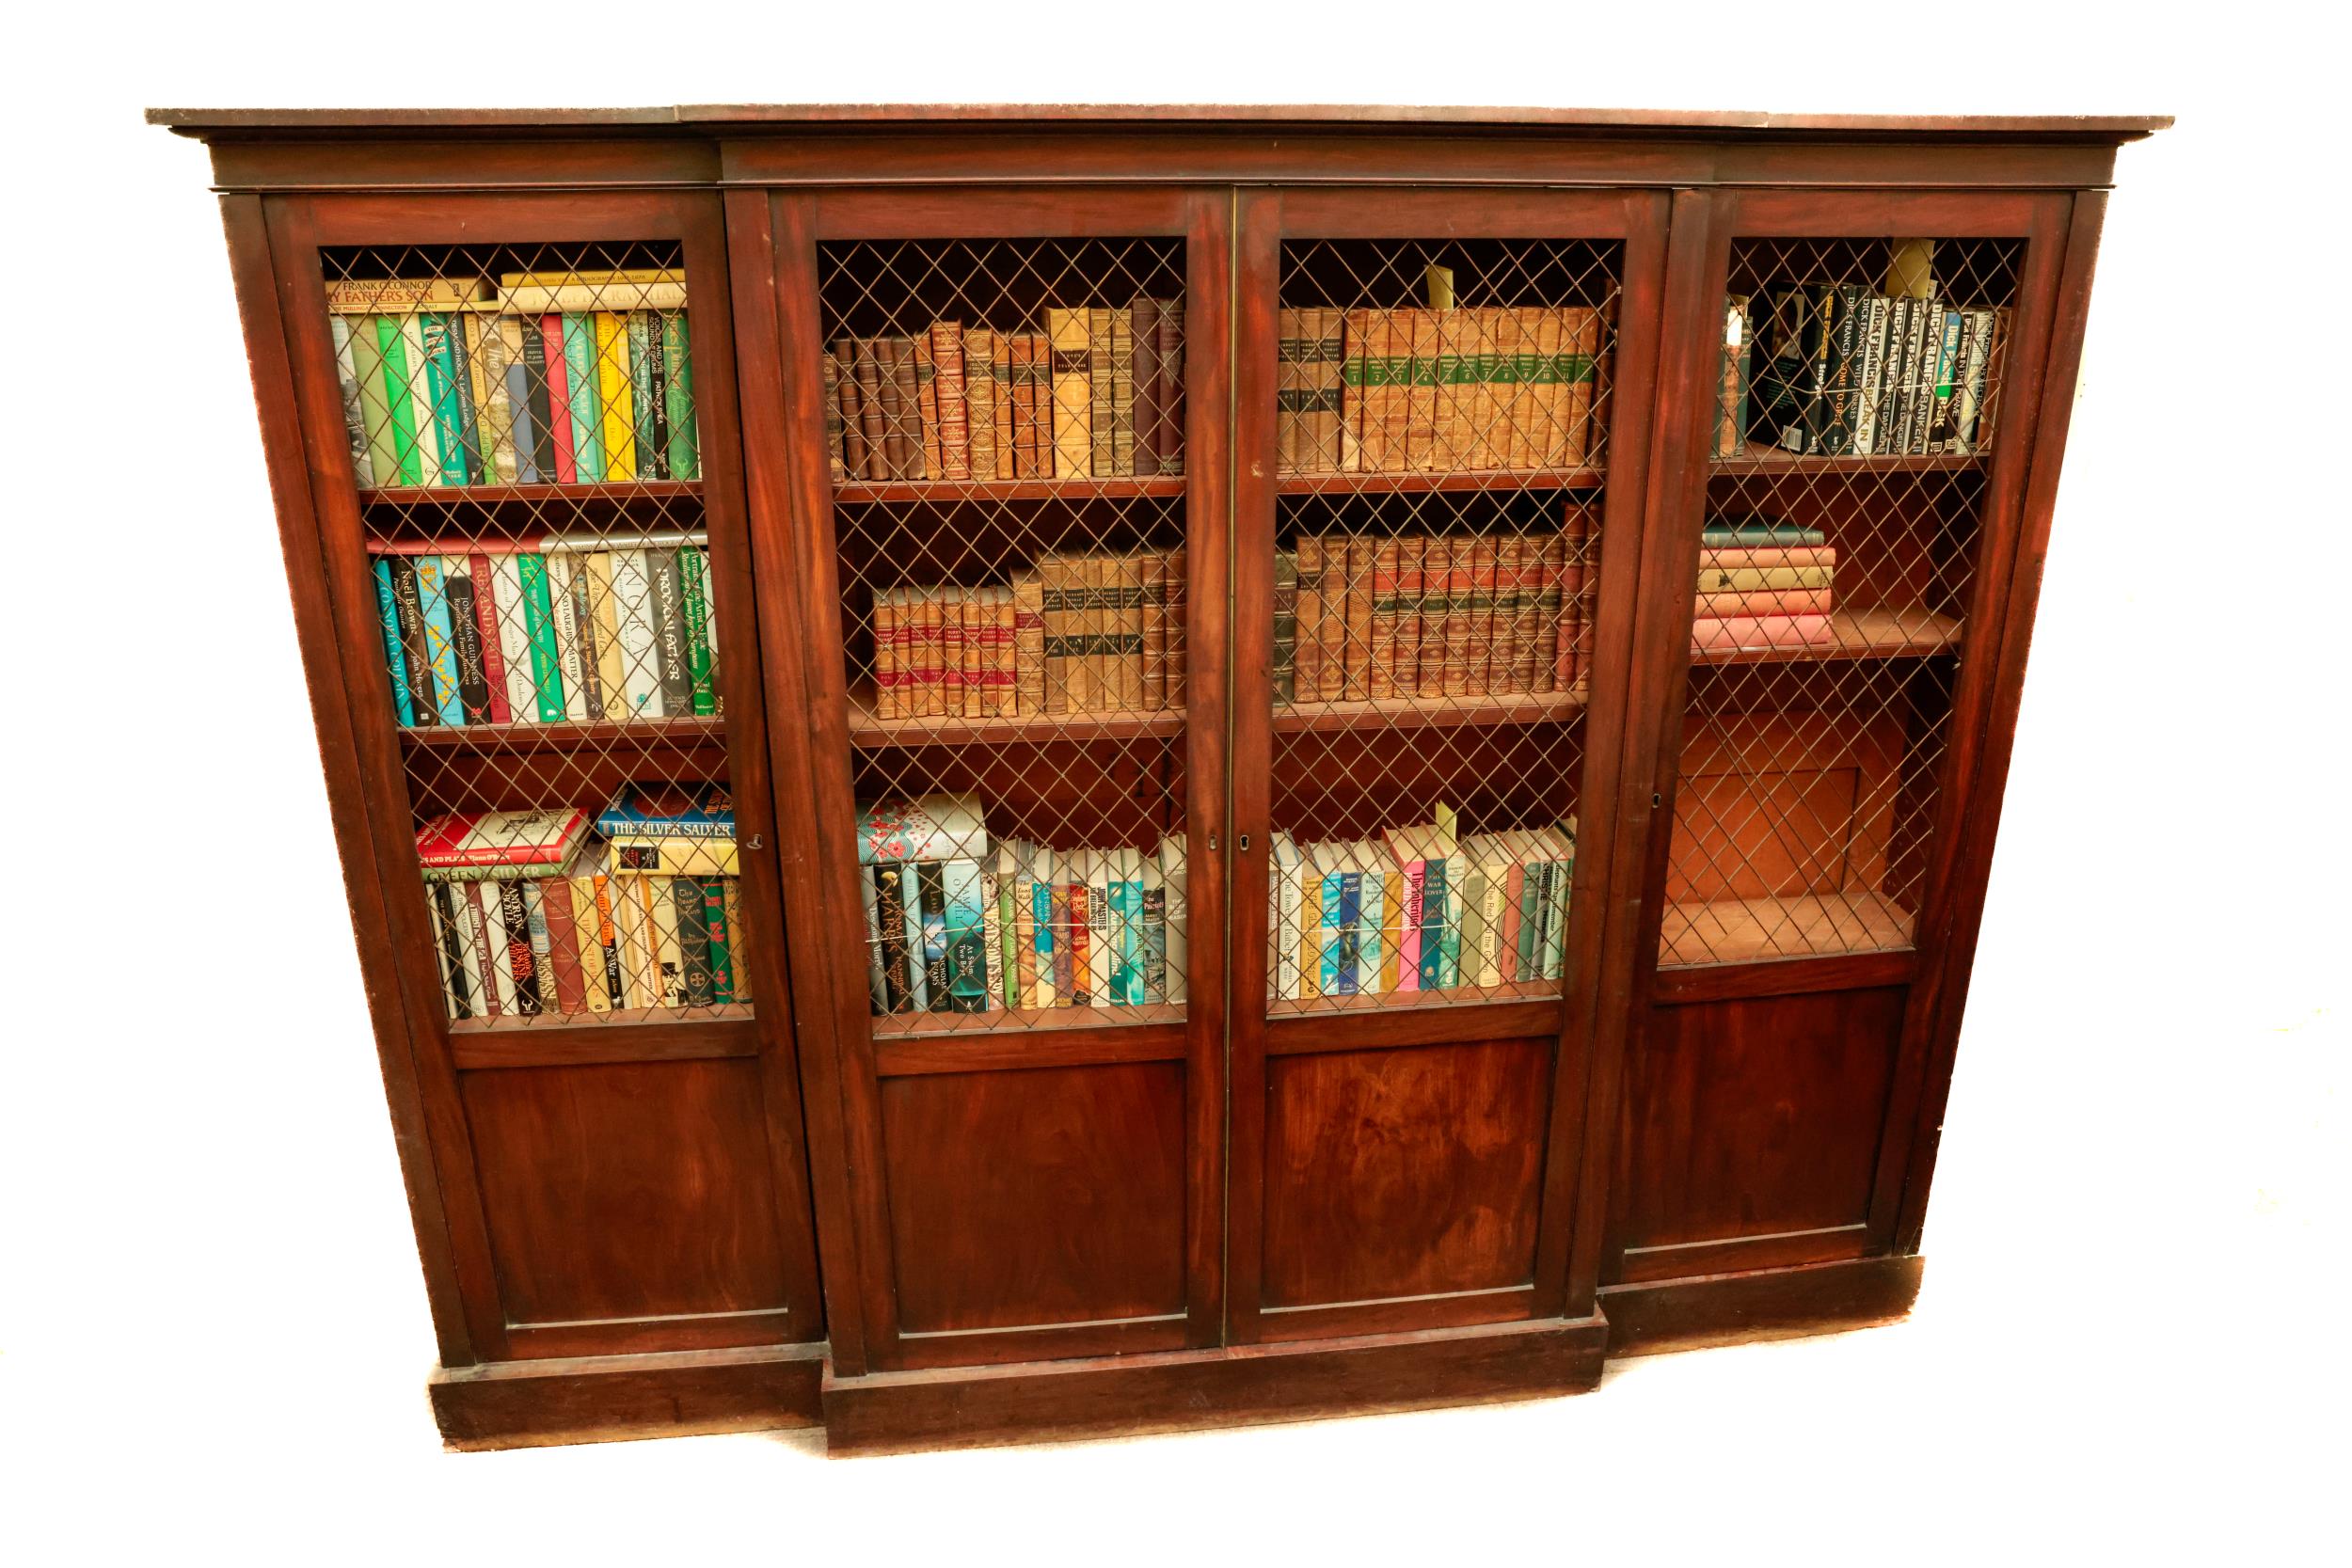 A fine quality Regency period mahogany breakfront Bookcase, the moulded cornice over four long